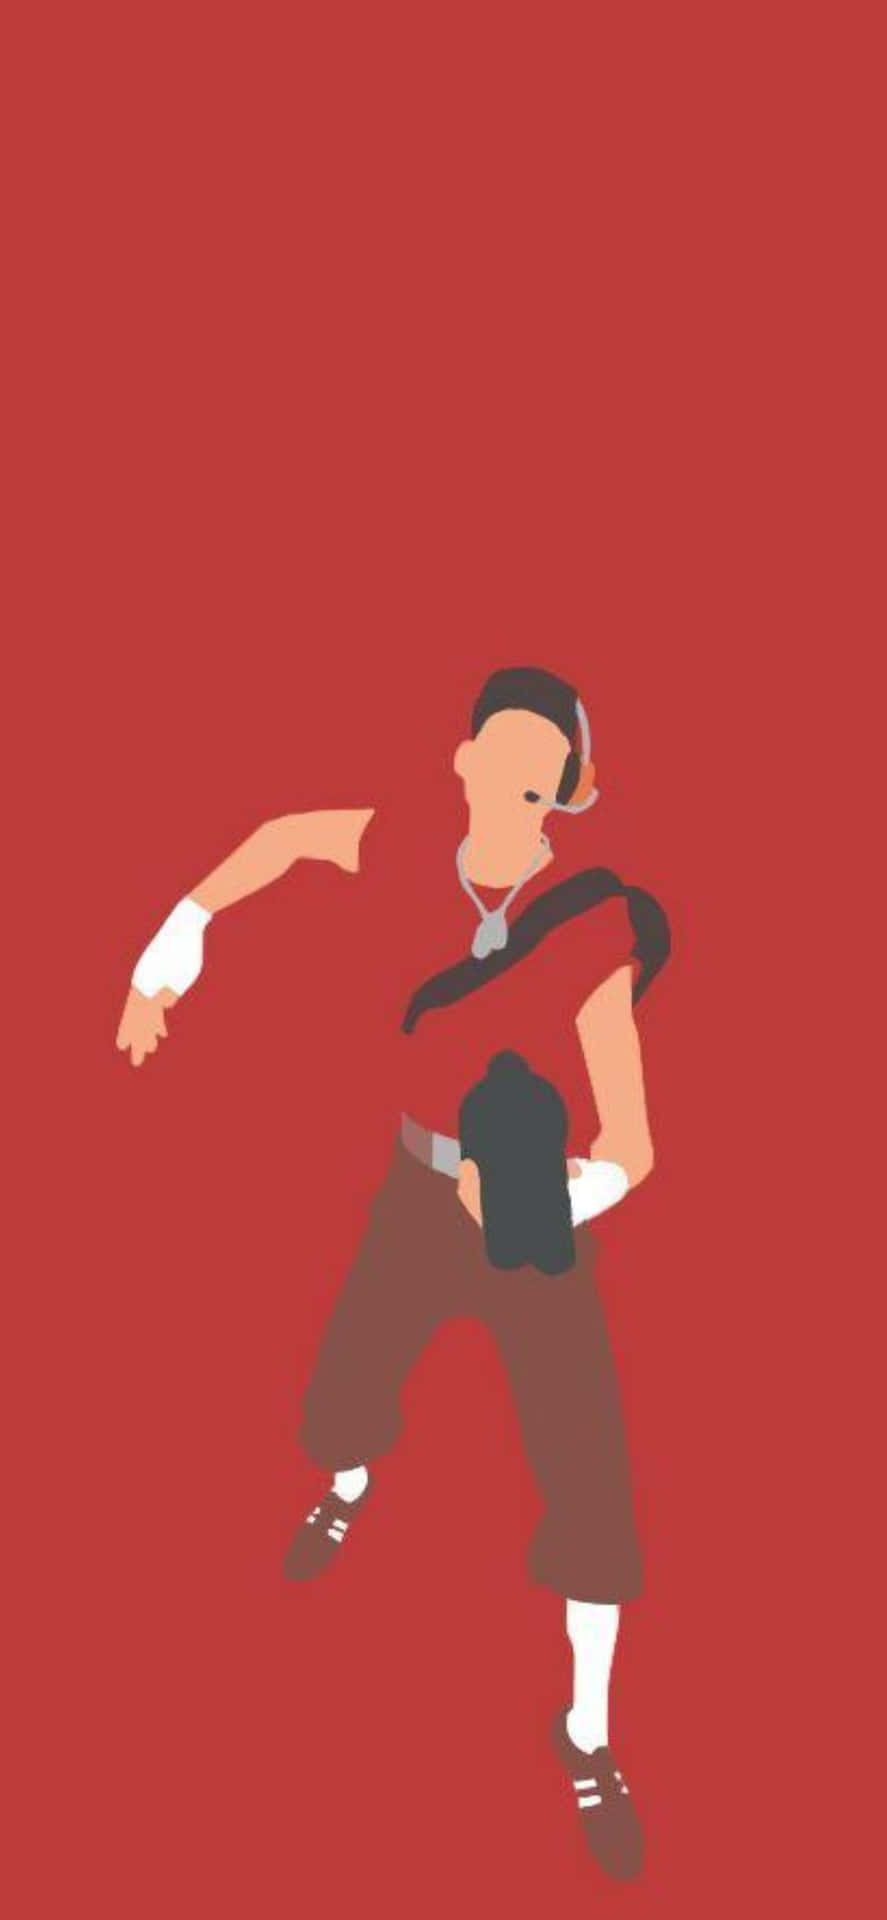 Iphone Xs Tf2 Background Red Poster Scout Taunting